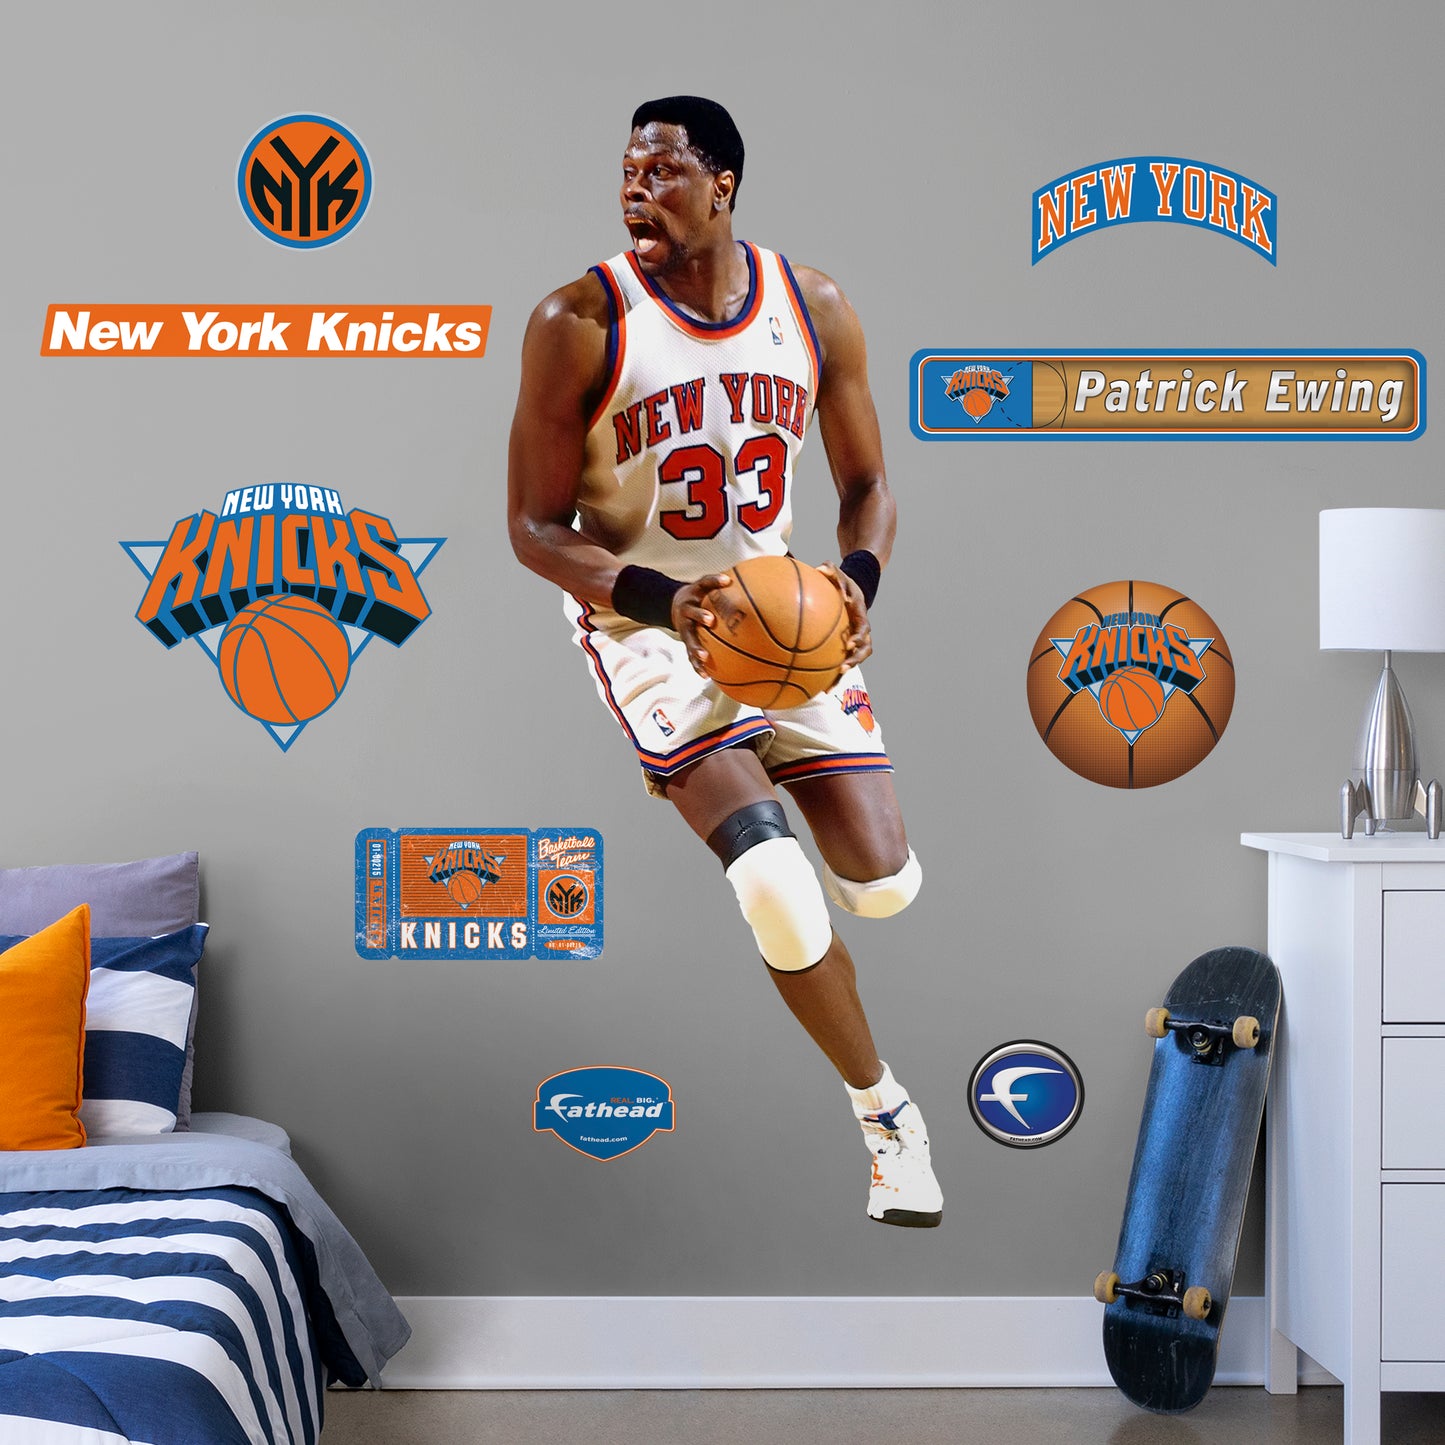 Patrick Ewing Legend  - Officially Licensed NBA Removable Wall Decal